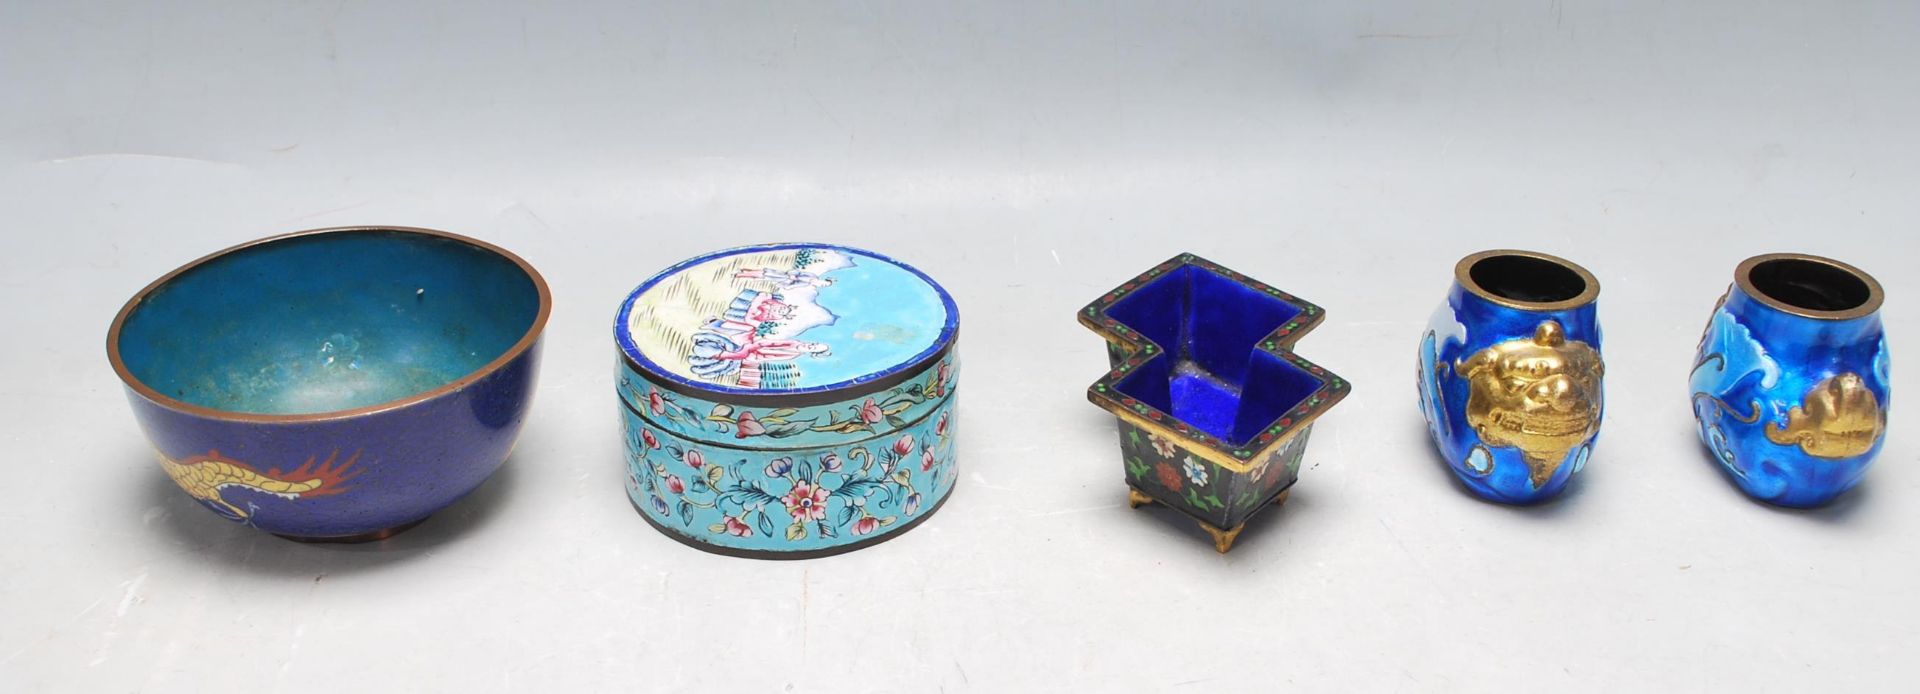 FIVE EARLY 20TH CENTURY CHINESE ENAMEL BOWLS - Image 2 of 5